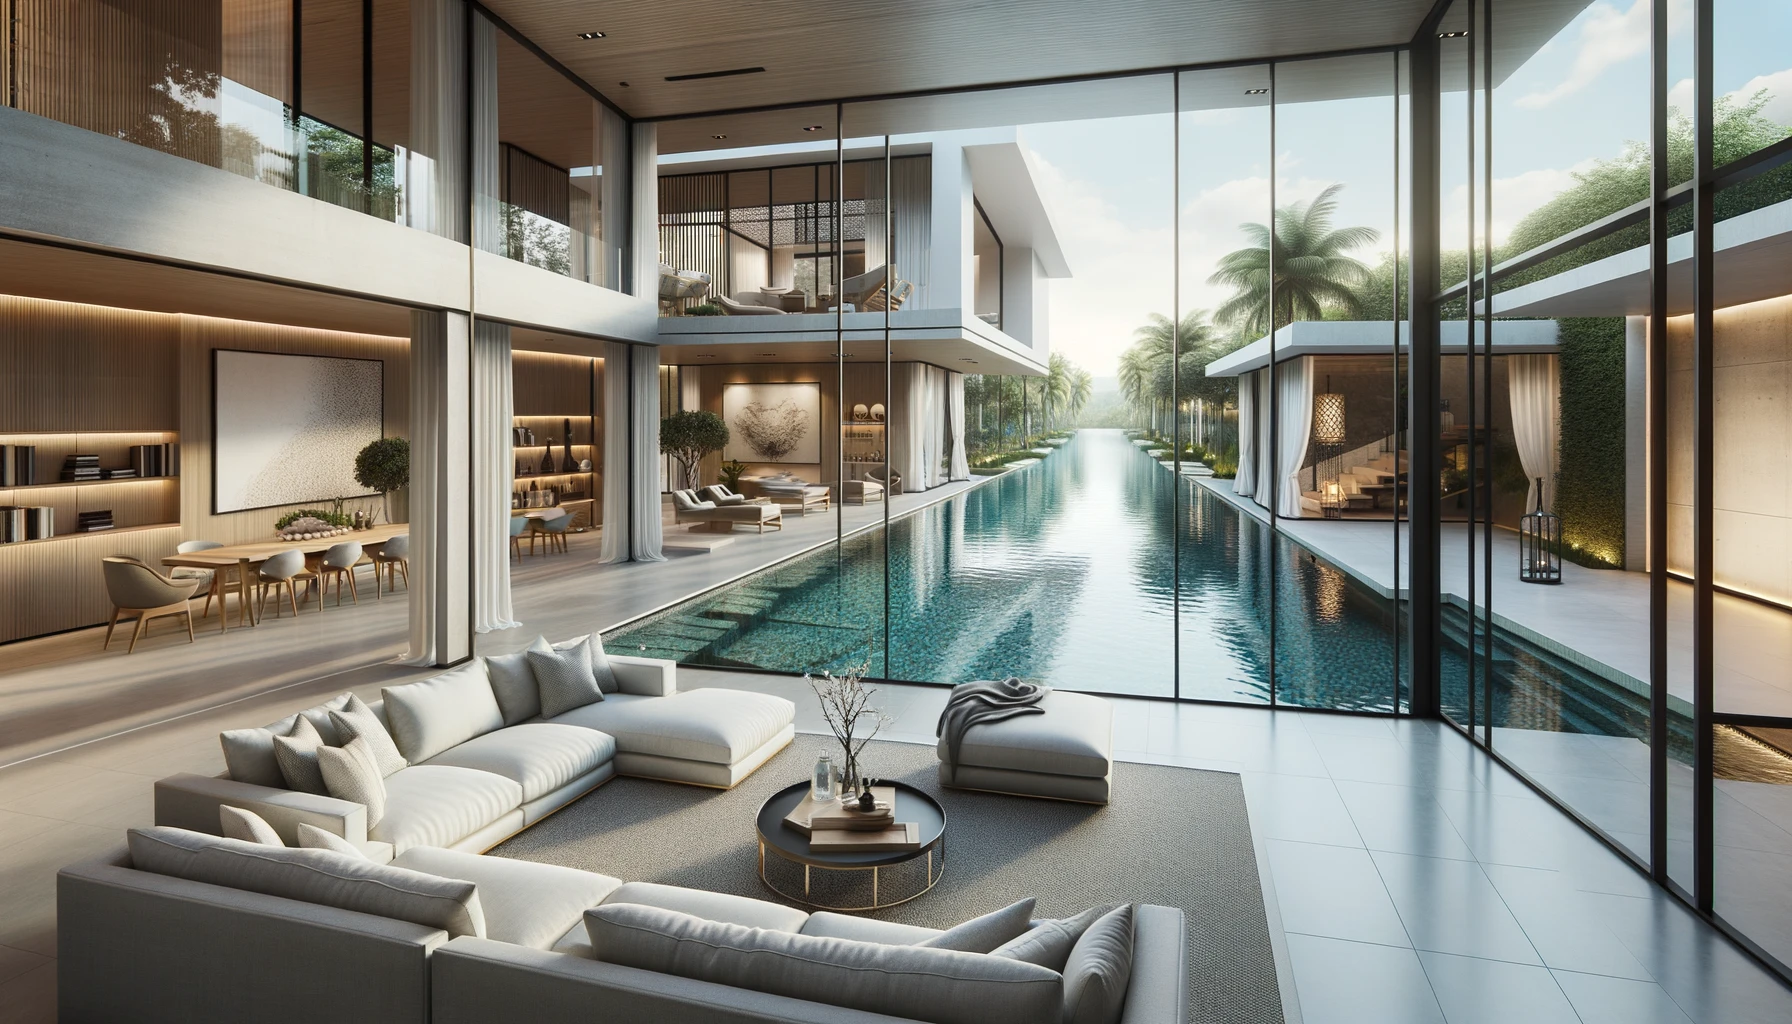 Minimalist living room interior with a panoramic view of an outdoor swimming pool.